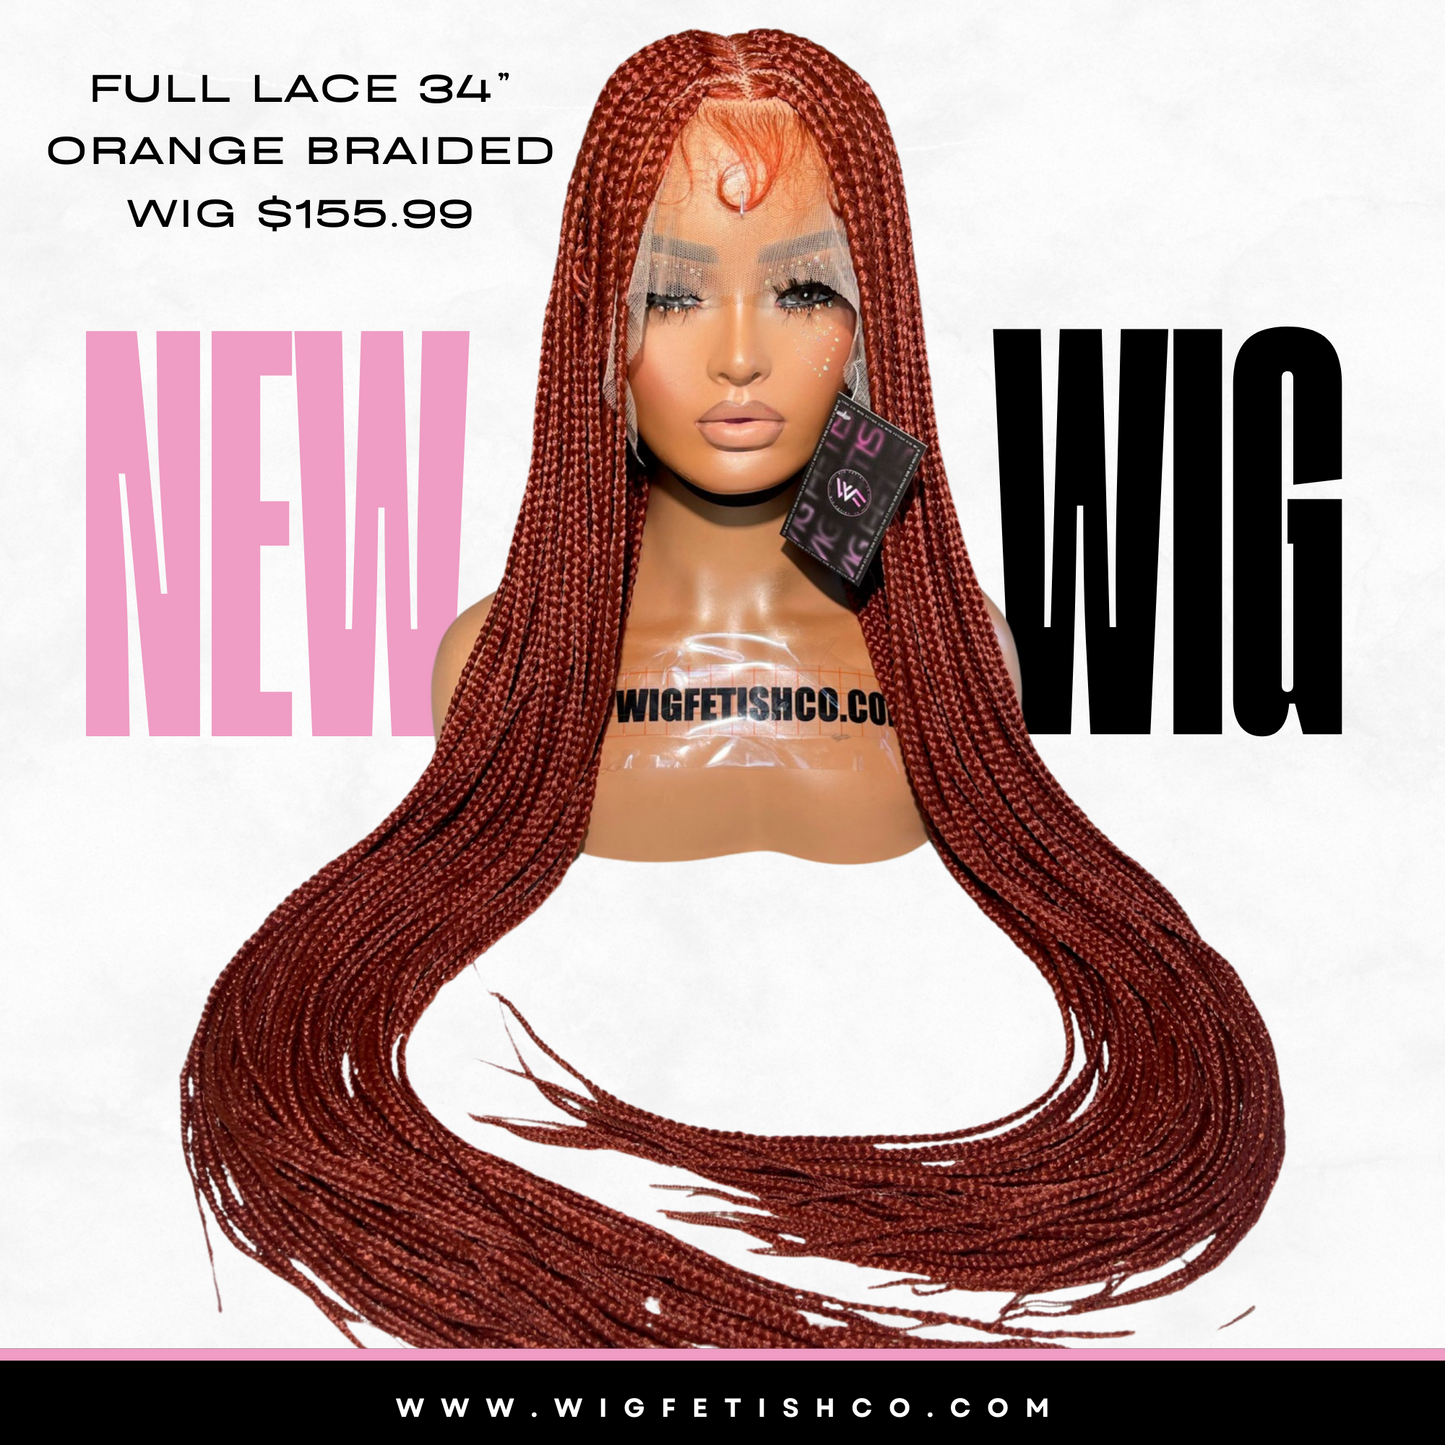 Full Lace Braided 34” Pre-Plucked Lace Frontal Wig - BORANGE